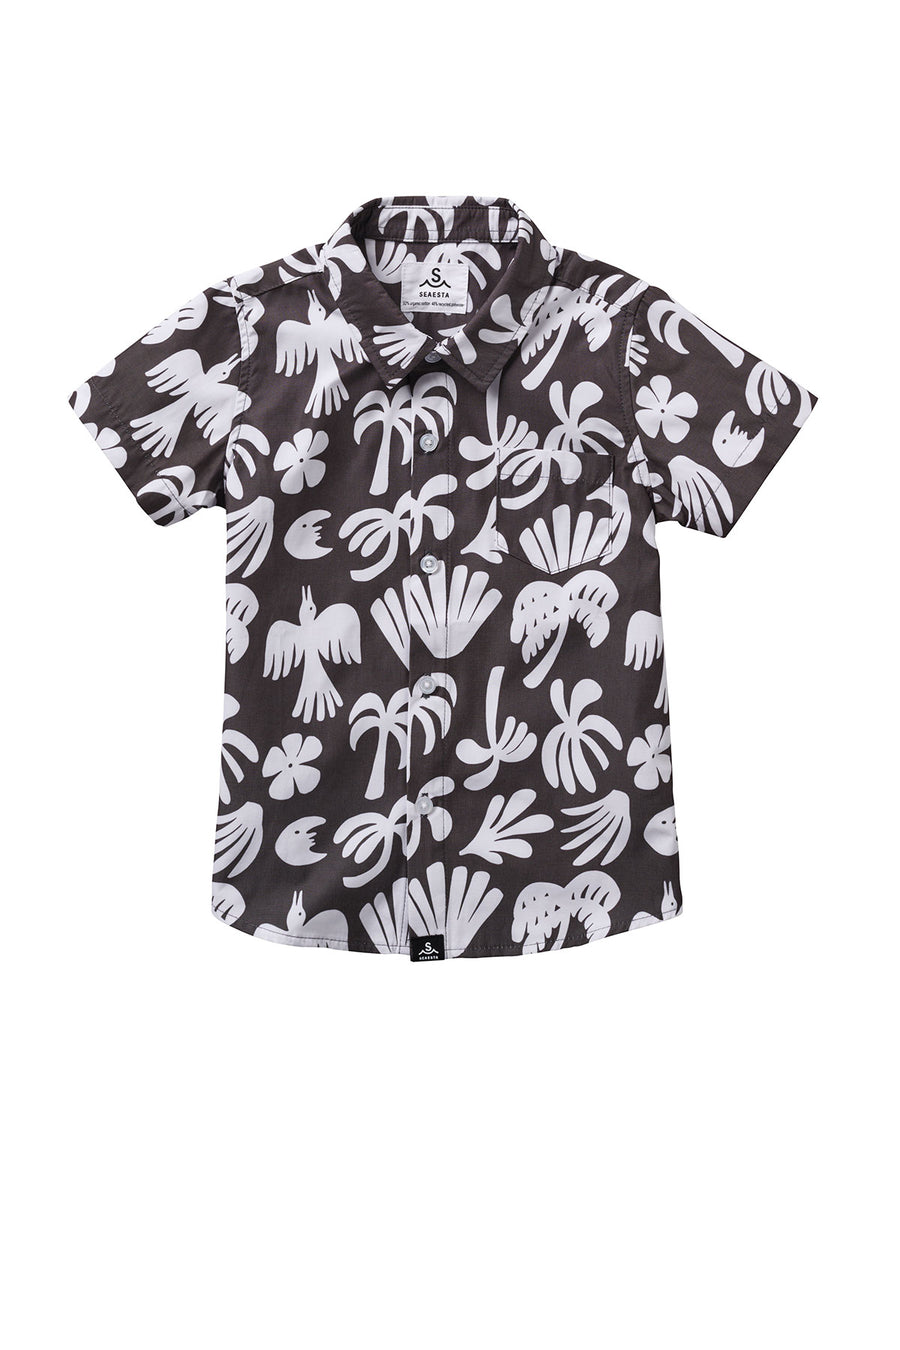 Seaesta Surf x Ty Williams Button Up Shirt / KIDS / Charcoal